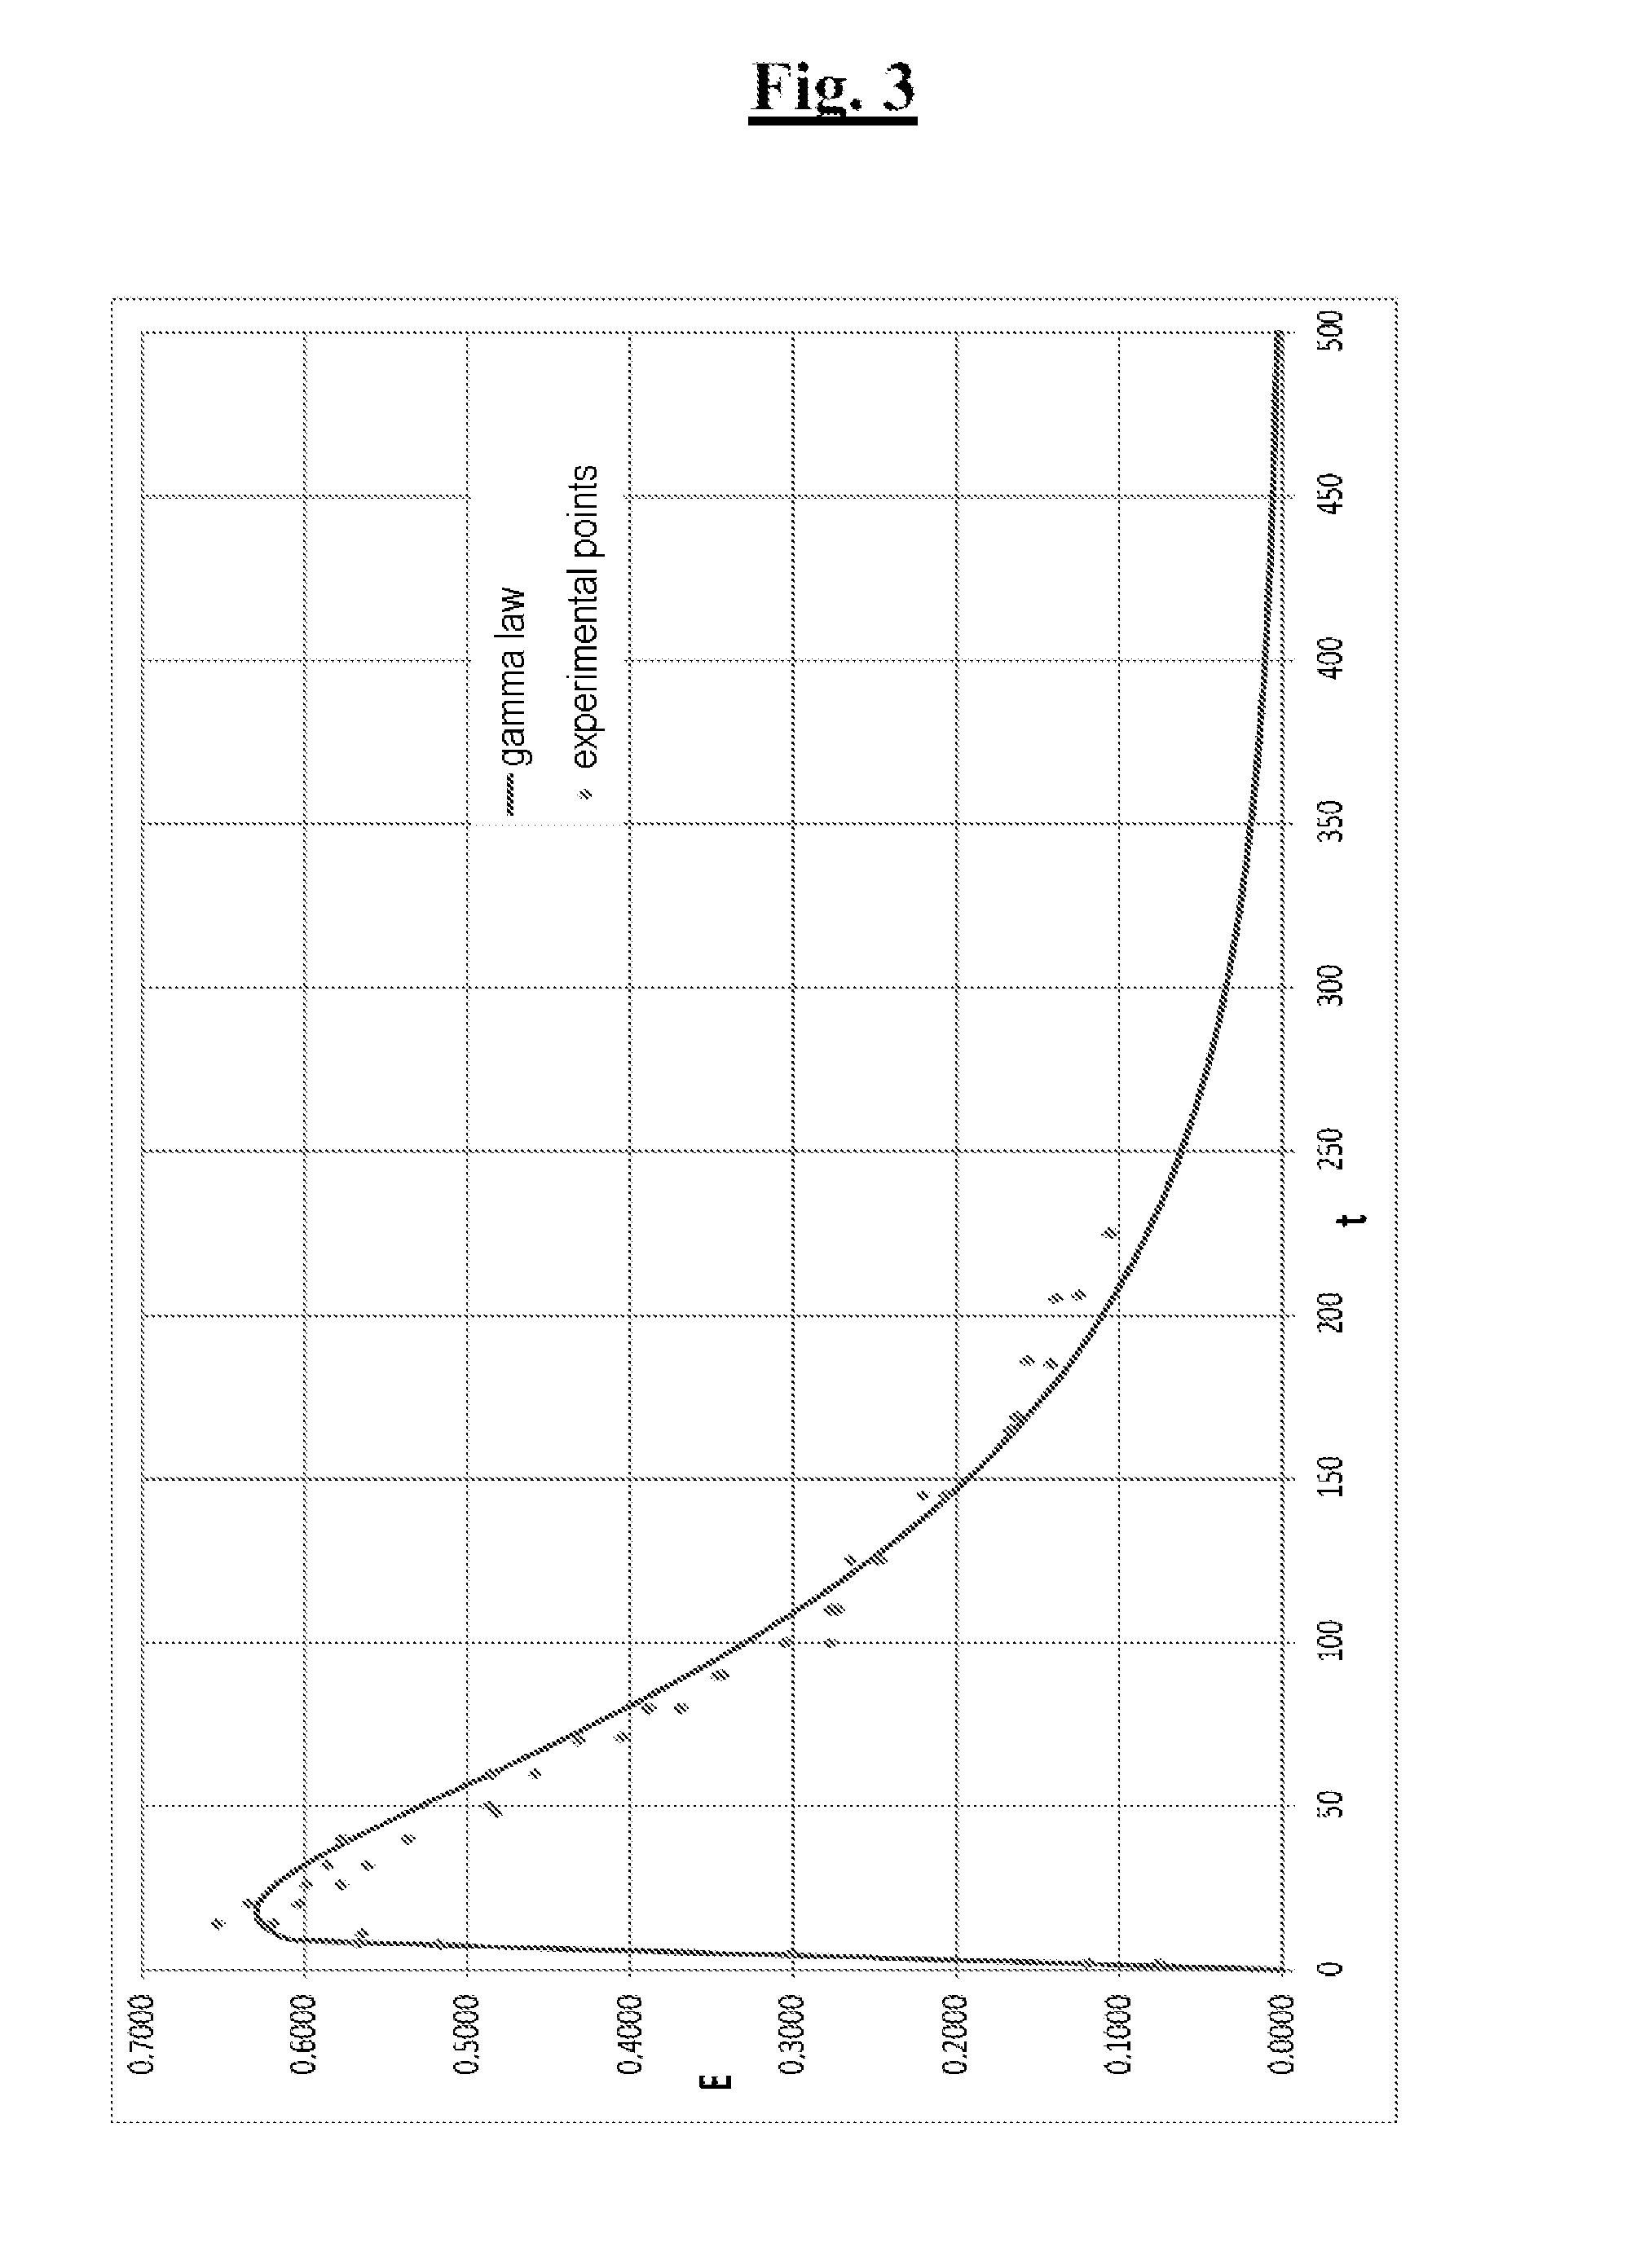 Process for continuous sytnthesis of a diene elastomer